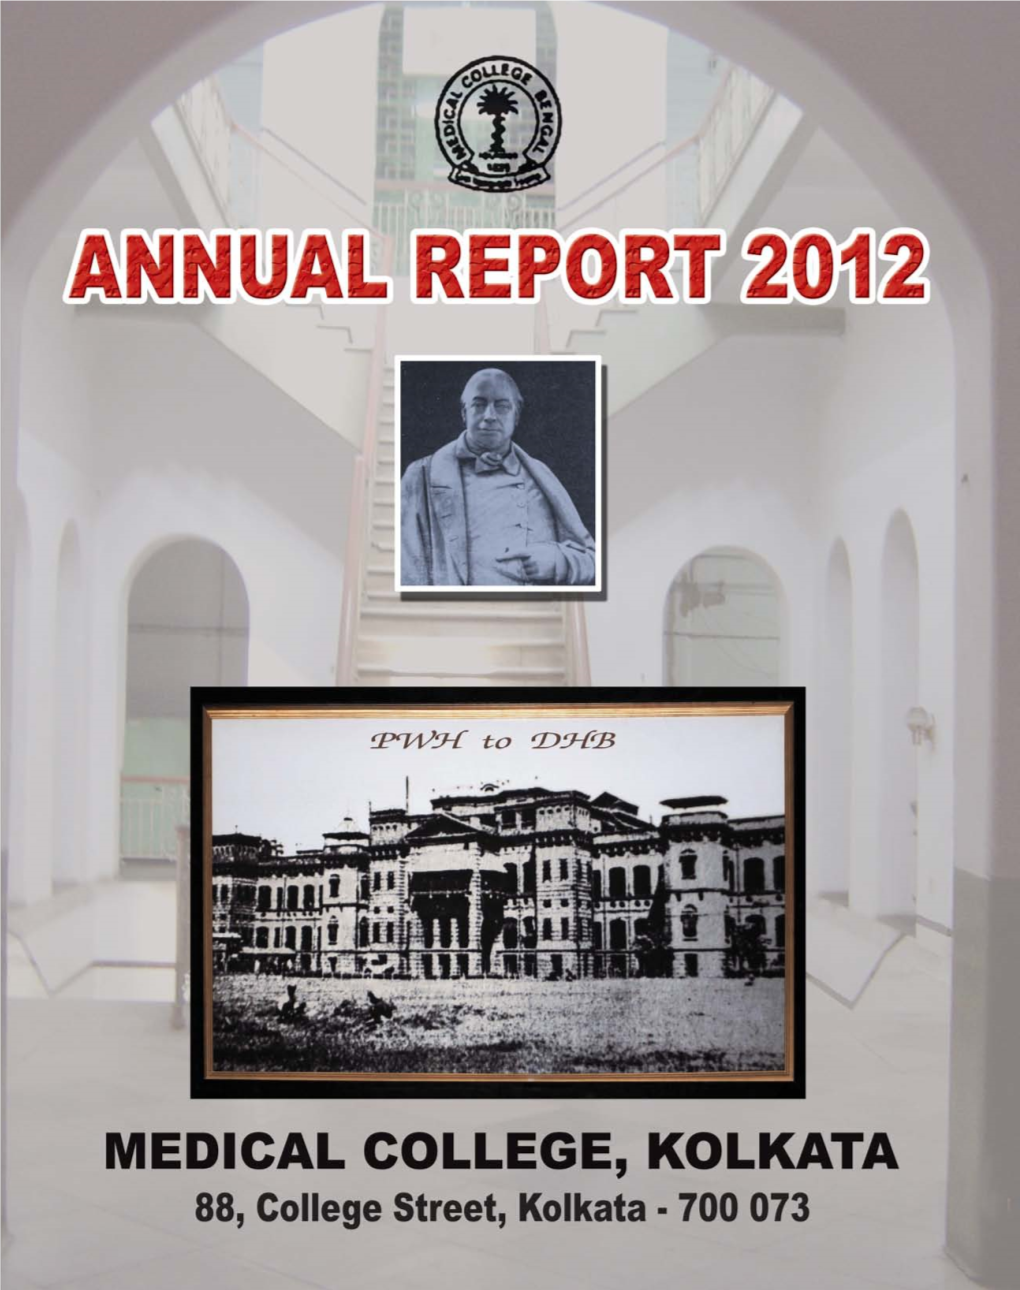 Medical College, Kolkata Is Having the 178Th Foundation Day on the 28Th January, 2012